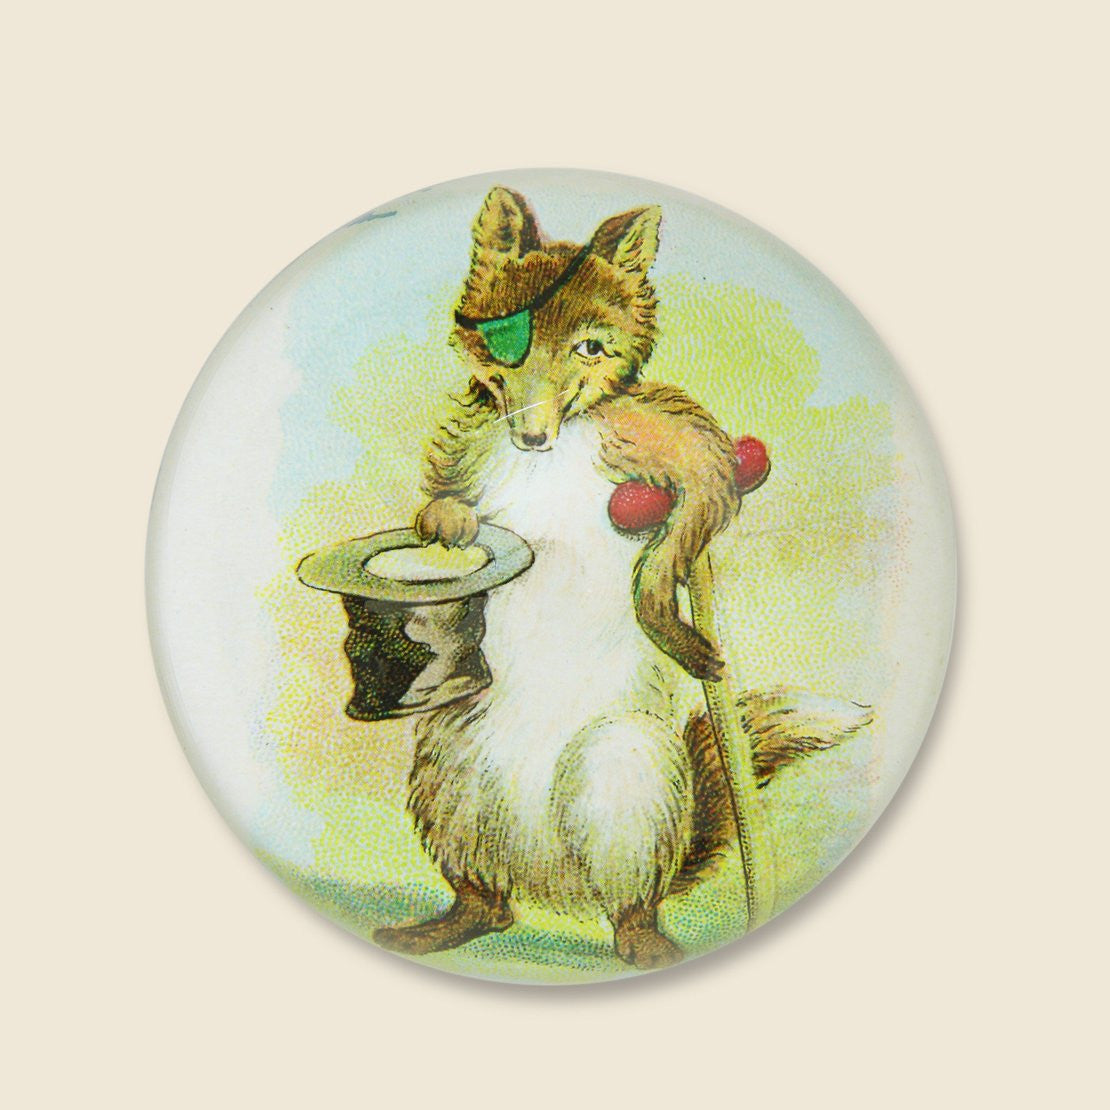 John Derian Dome Paperweight - Fox with Cane